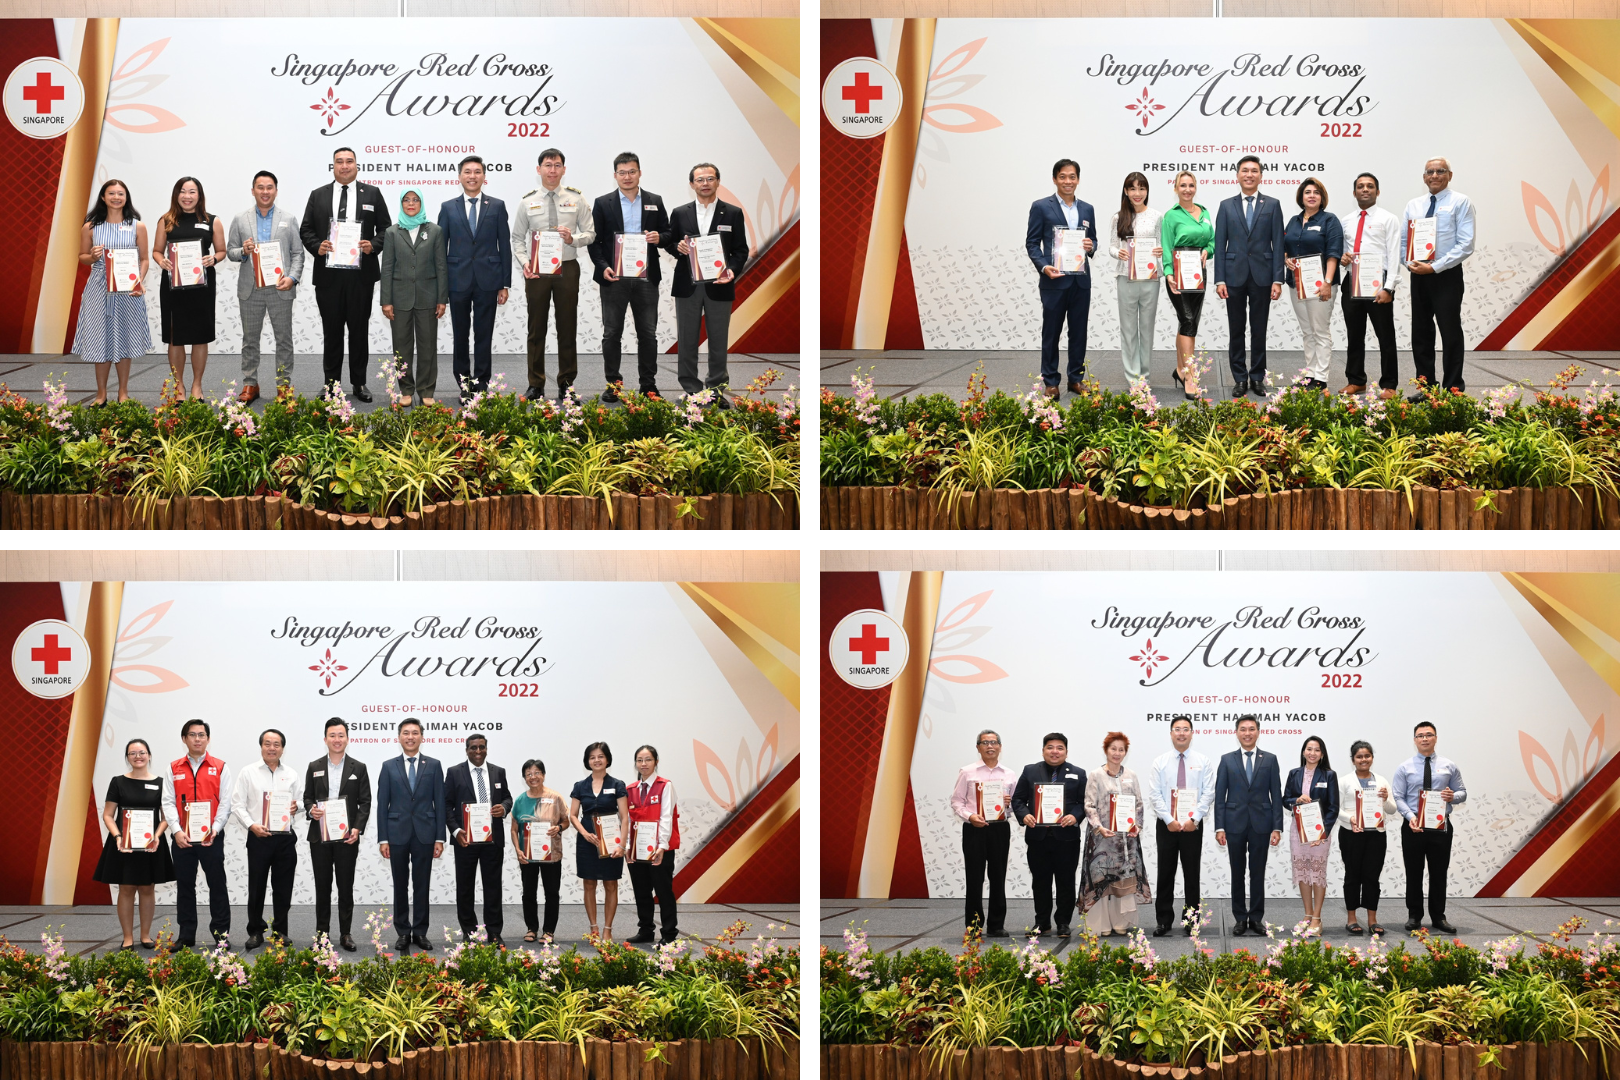 Recipients of Singapore Red Cross Awards 2022 2